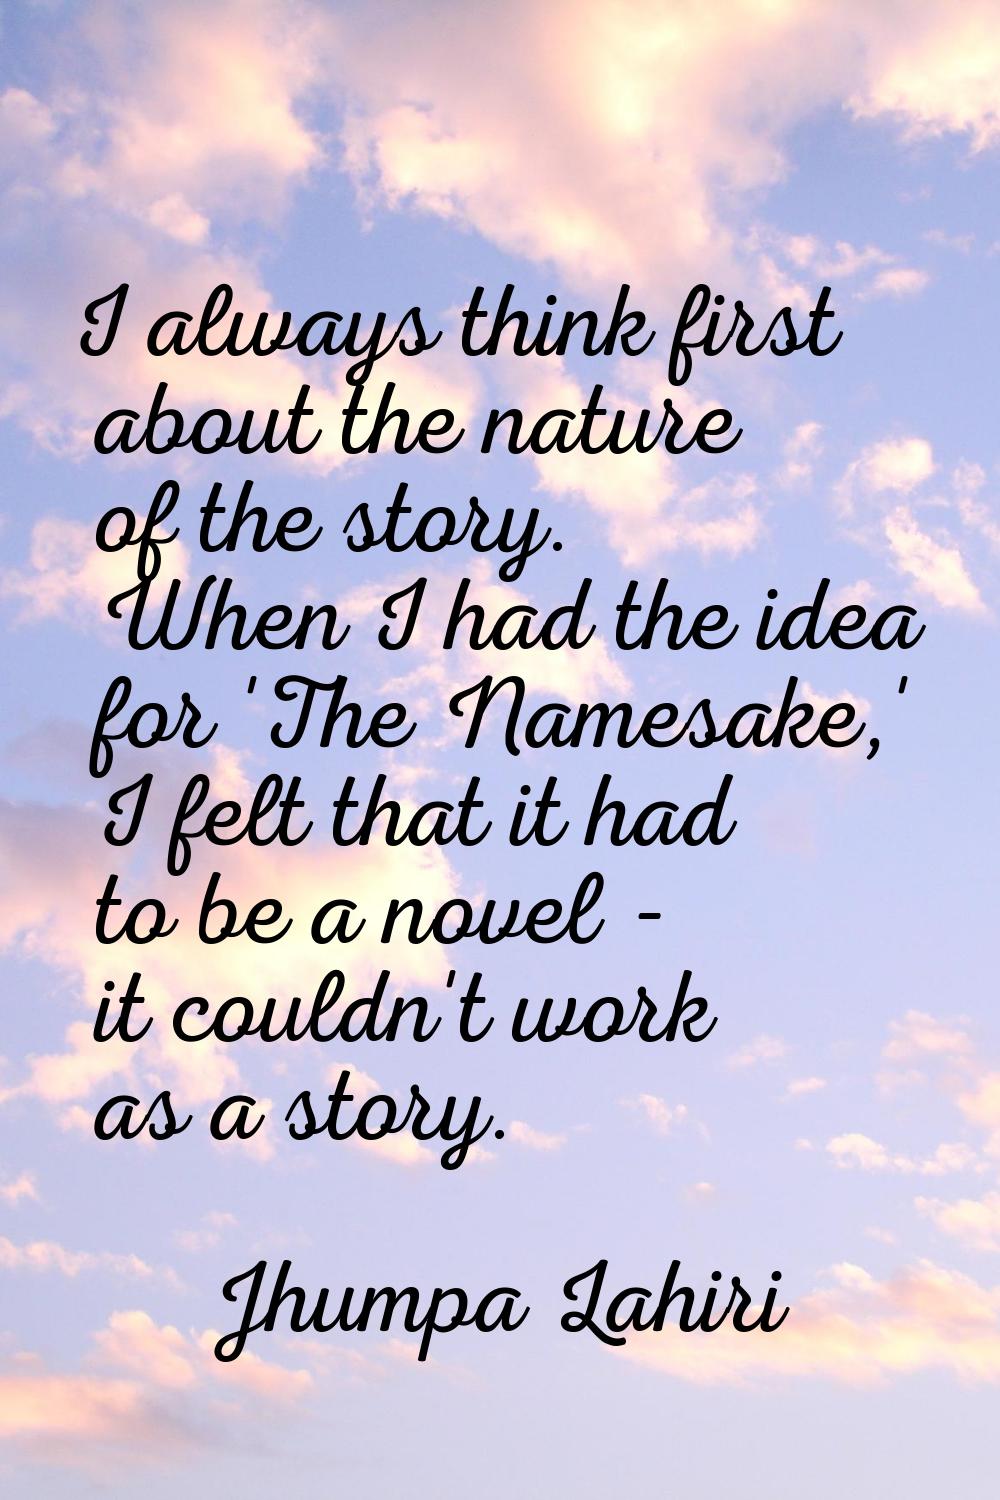 I always think first about the nature of the story. When I had the idea for 'The Namesake,' I felt 